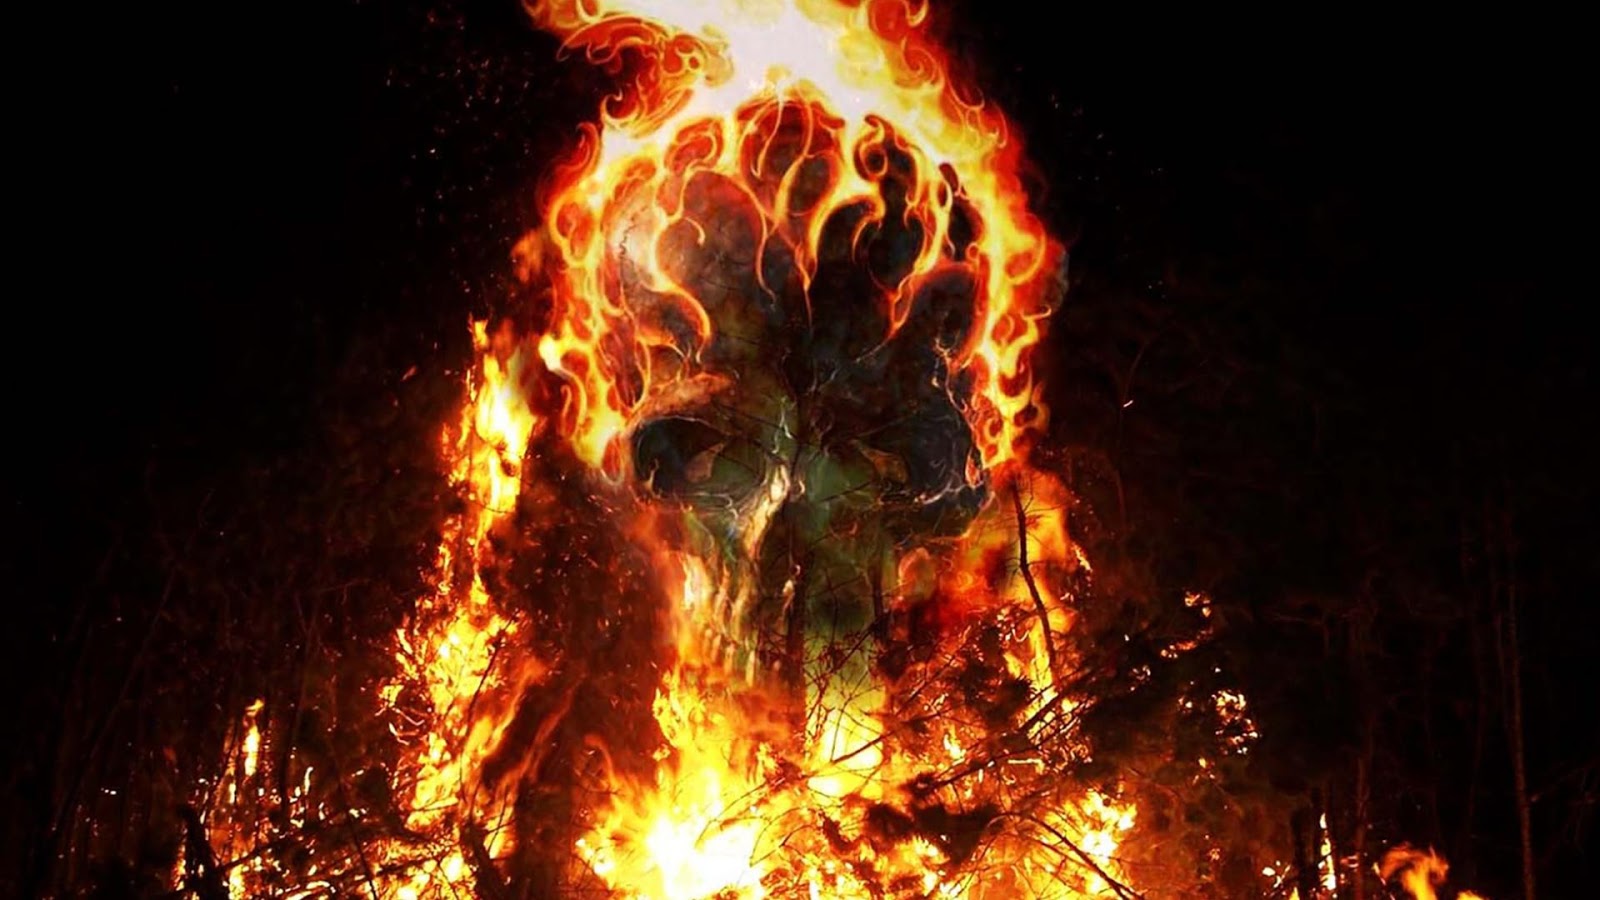 Fire Skulls Live Wallpaper Android Apps On Google Play